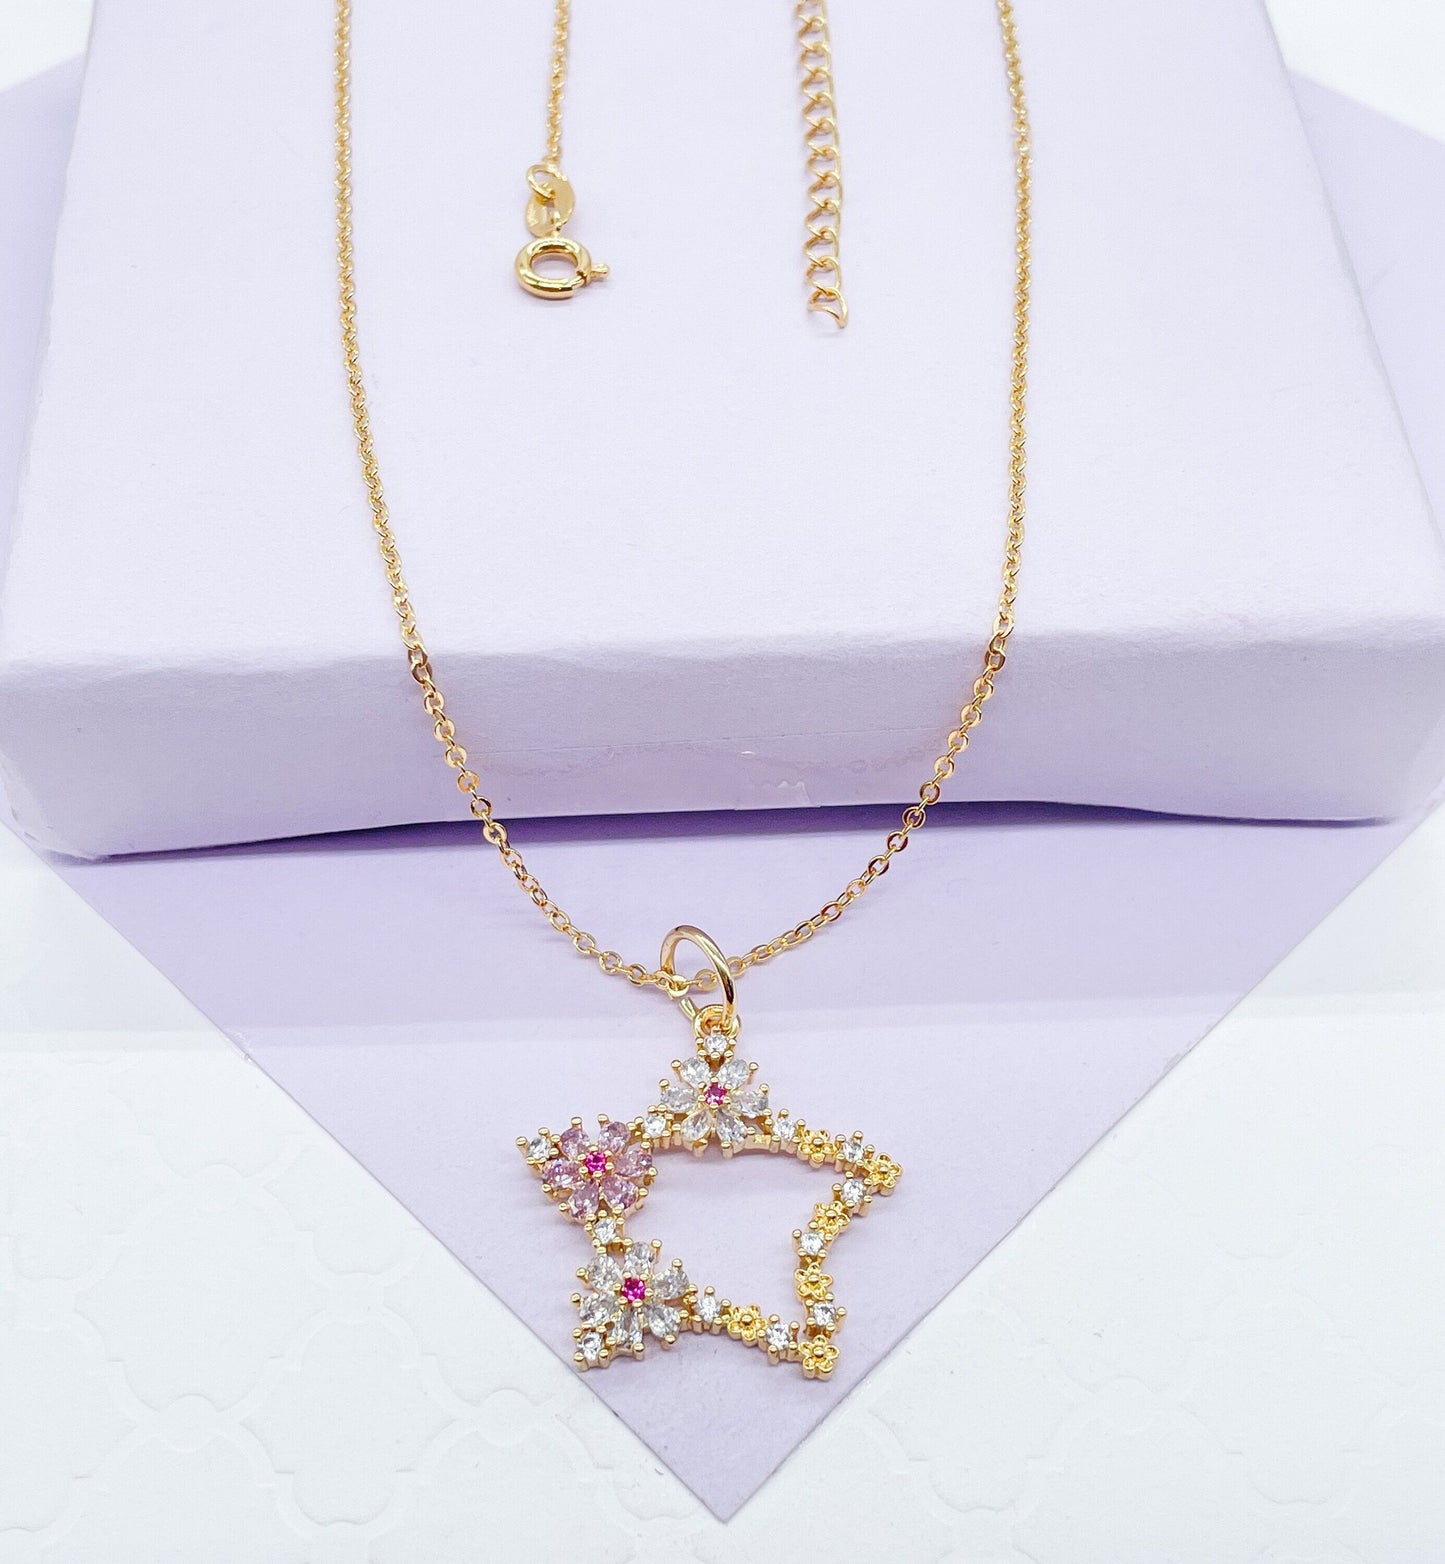 18k Gold Filled Charm Necklace with Pink, Magenta and White CZ stones